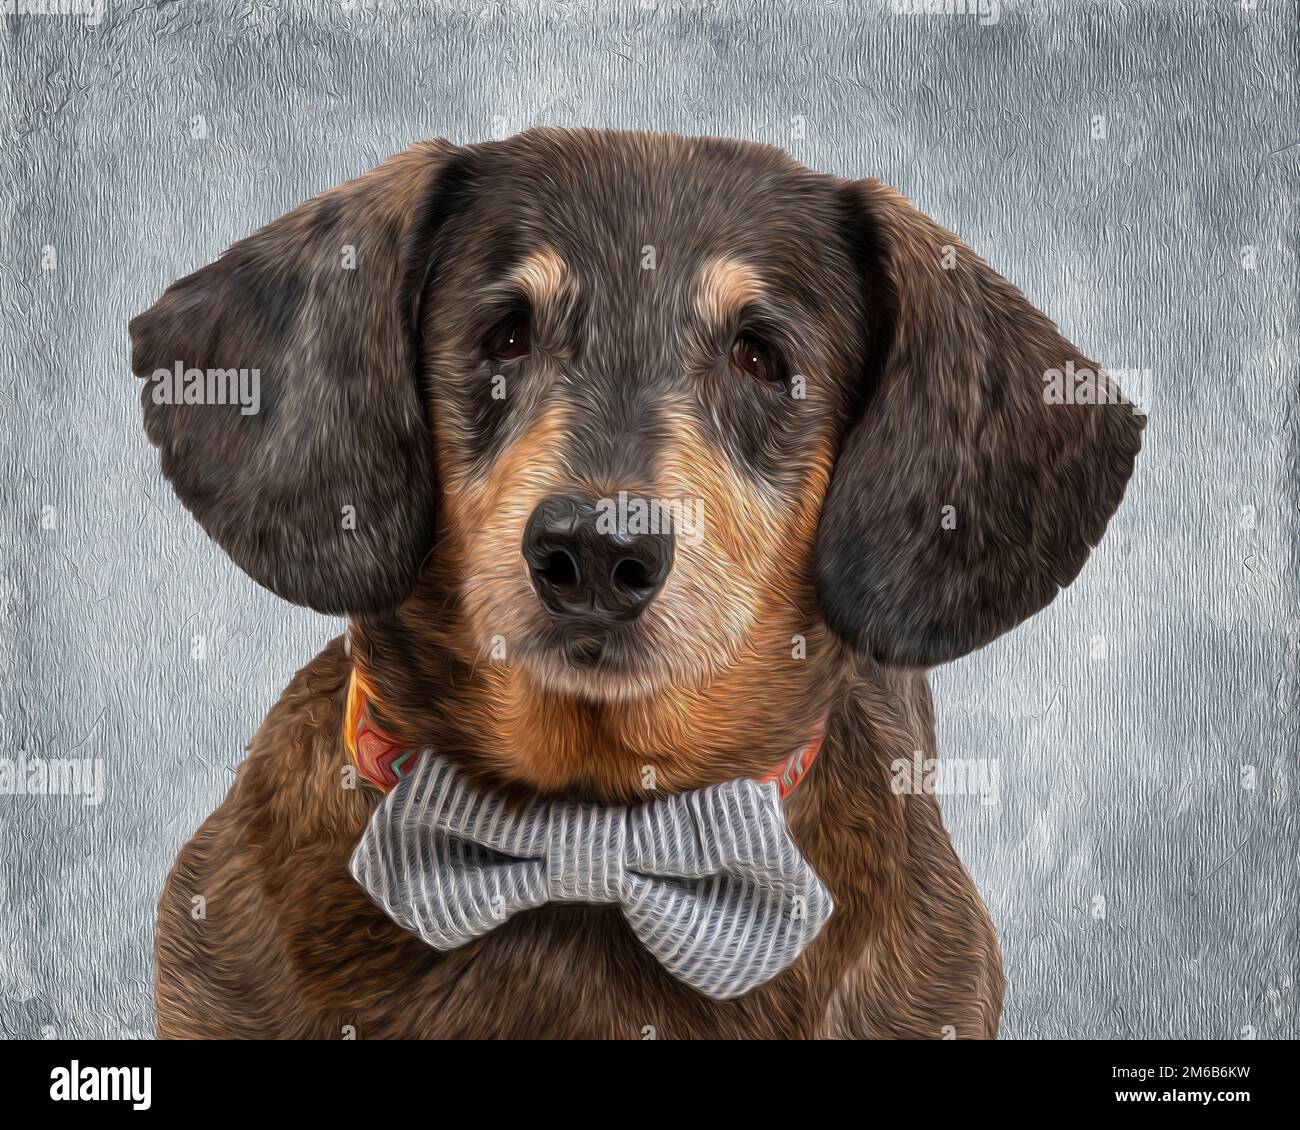 A very old, very gentle, and very loving little dachshund enjoys being king for the day with his spiffy bow tie.  To further enhance his royal image, Stock Photo